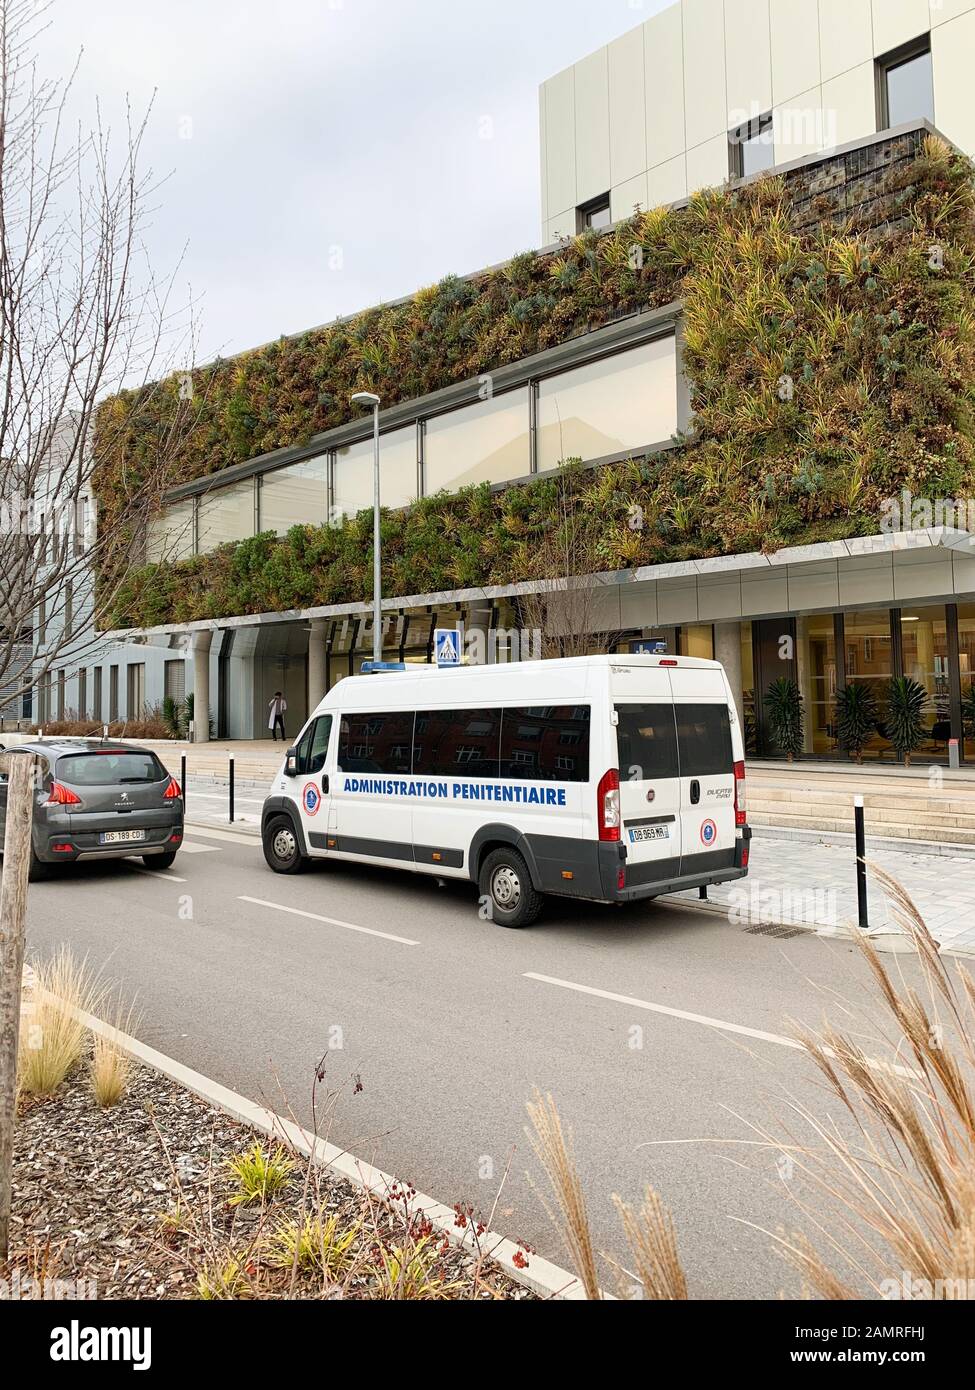 Strasbourg, France - Dec 14, 2018: Side view of Fiat Ducato white van with Administration penitentiaire en France translated Prison administration parked in front of NHC hospital Stock Photo